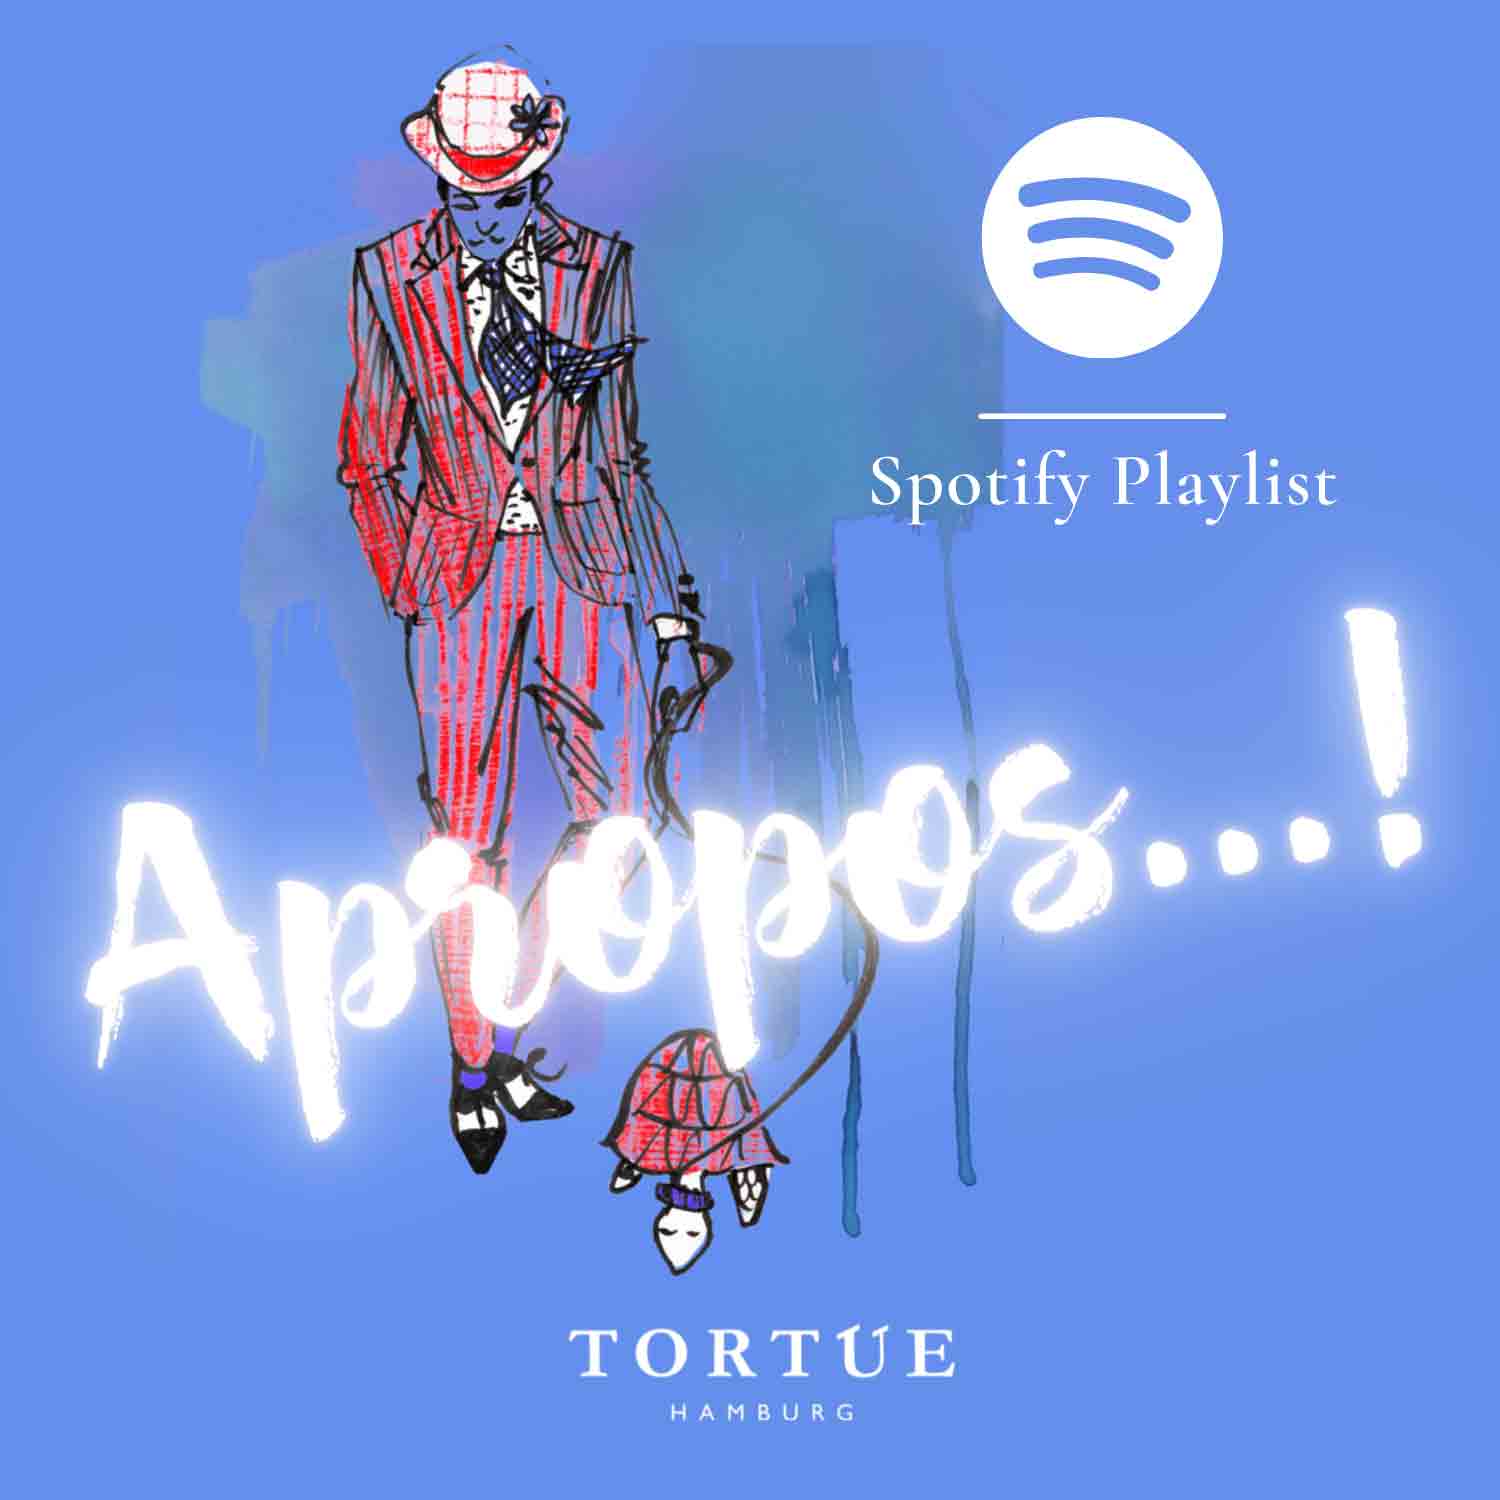 listen on spotify to the original hotel tortue podcast